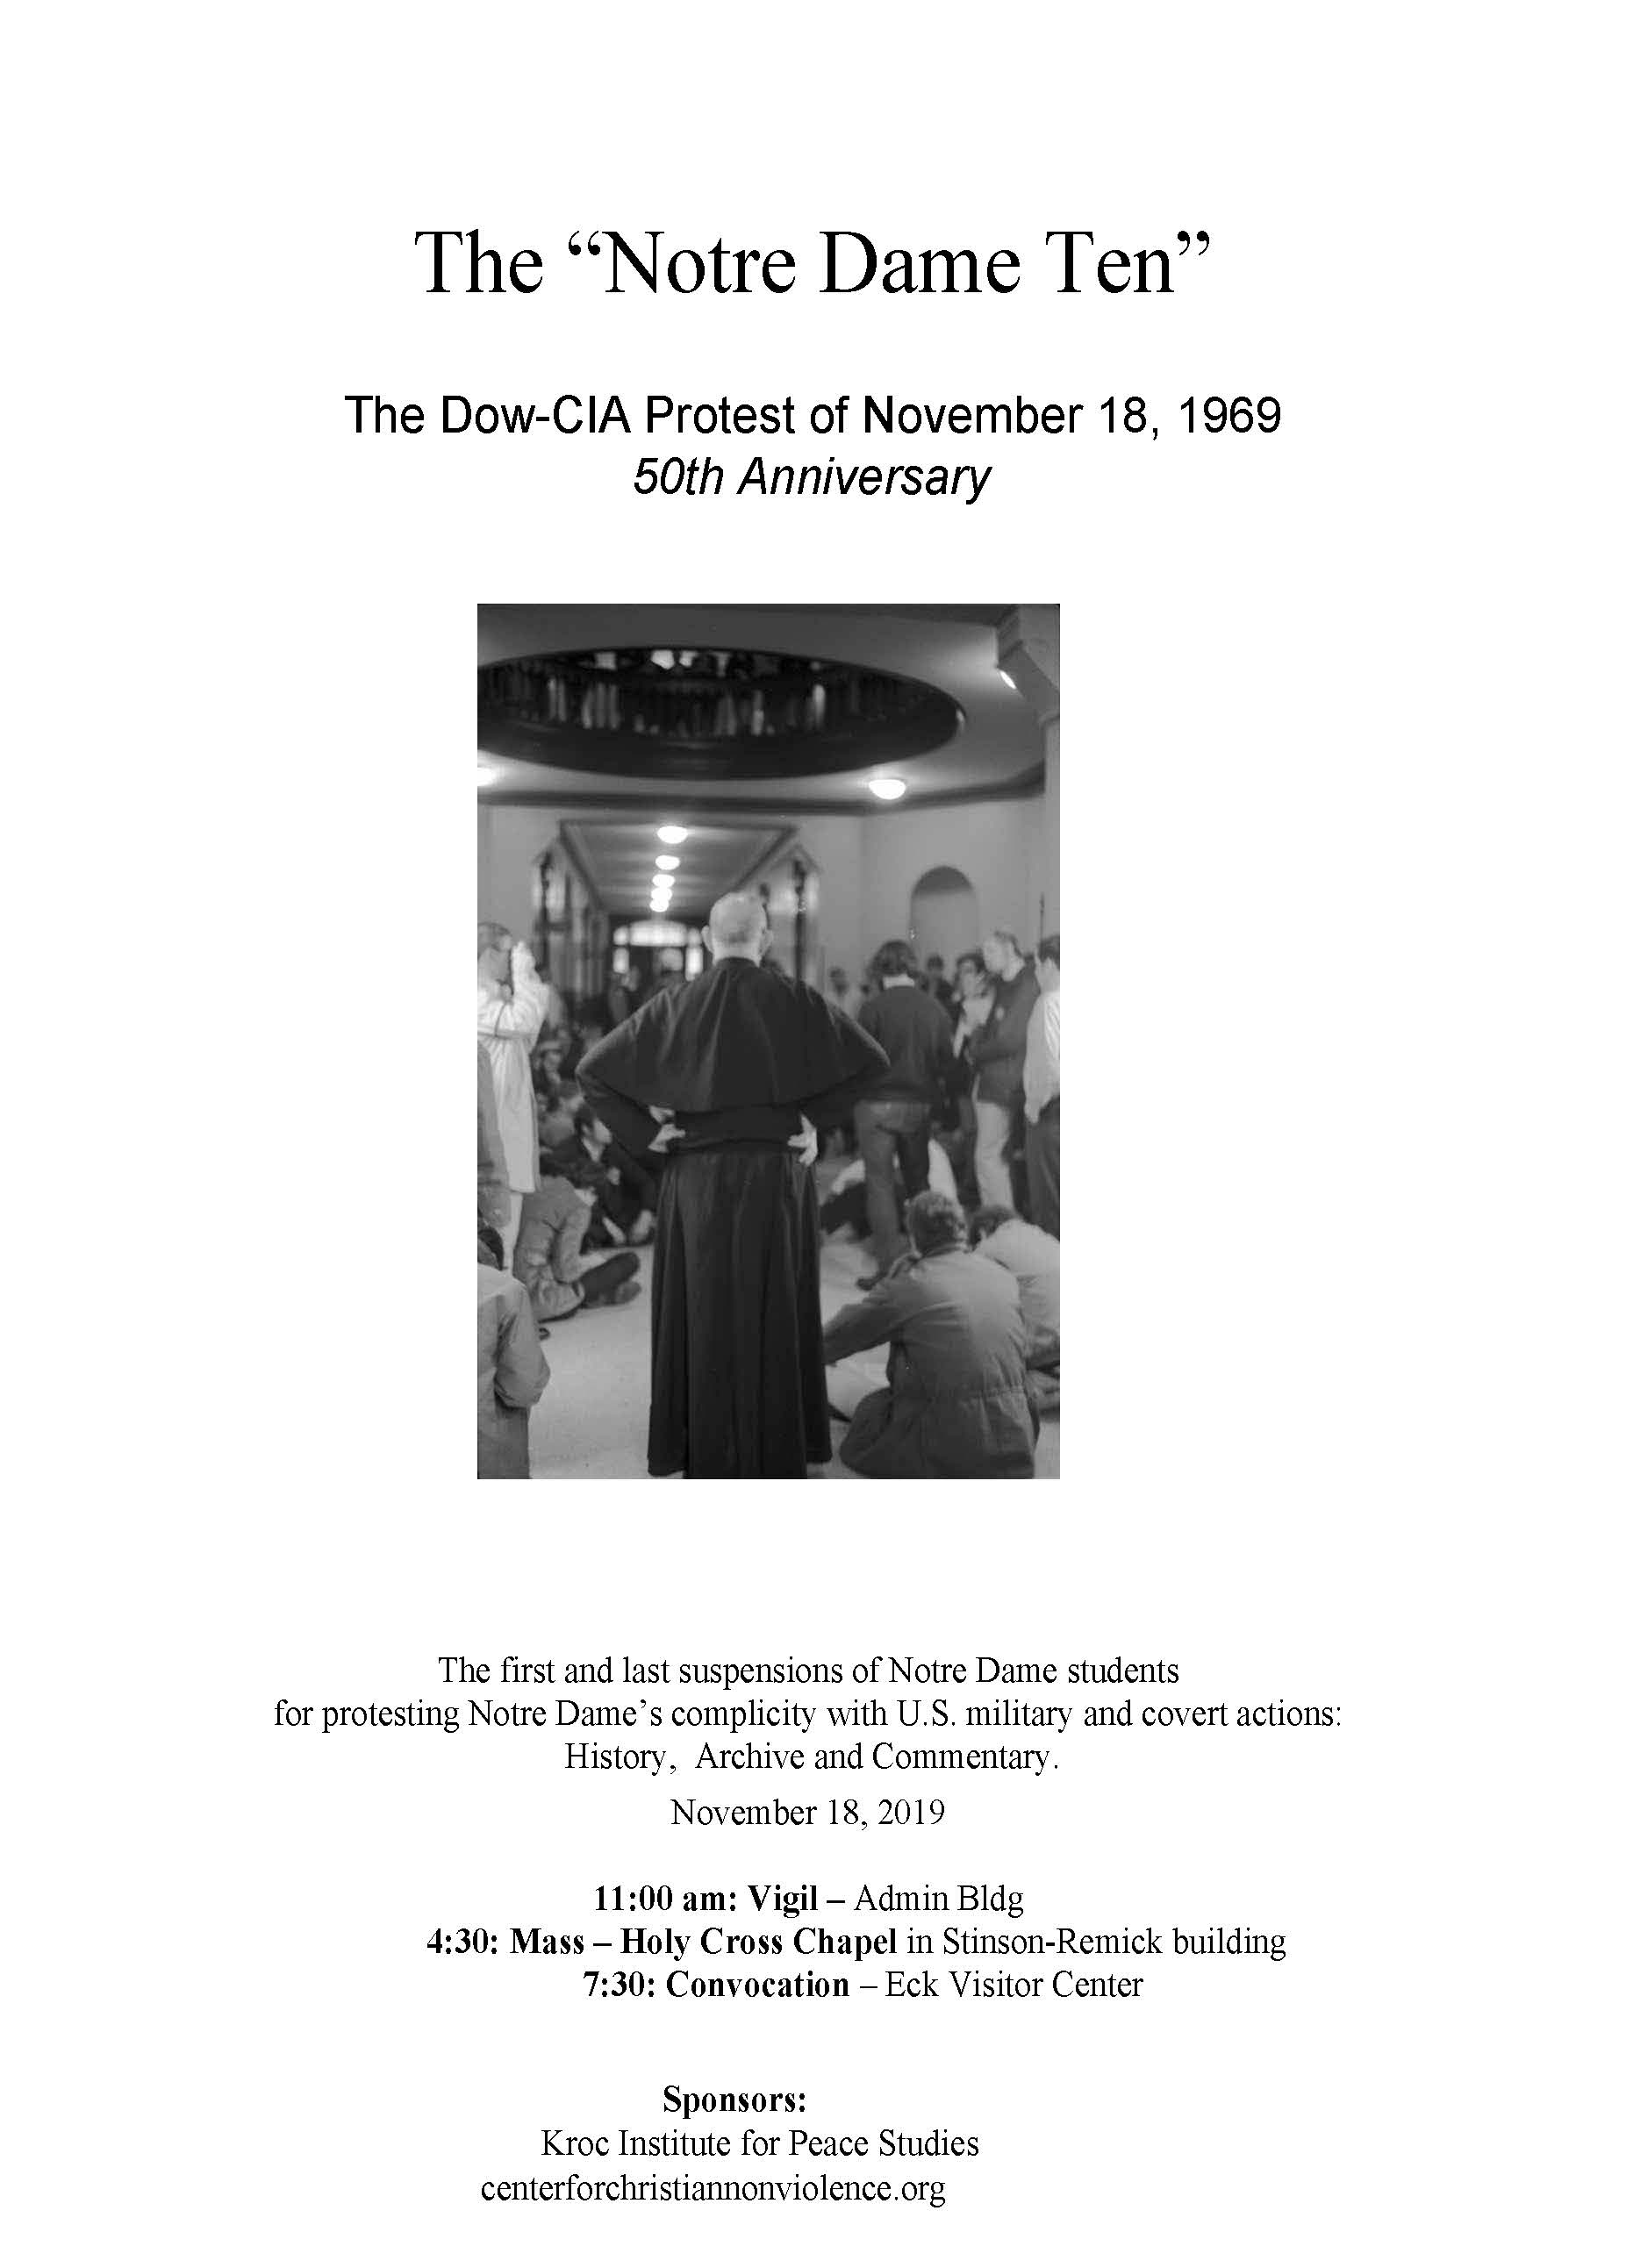 The Notre Dame Ten: The Dow-CIA Protest of November 18, 1969 - Publication (PDF) by Mark J. Mahoney